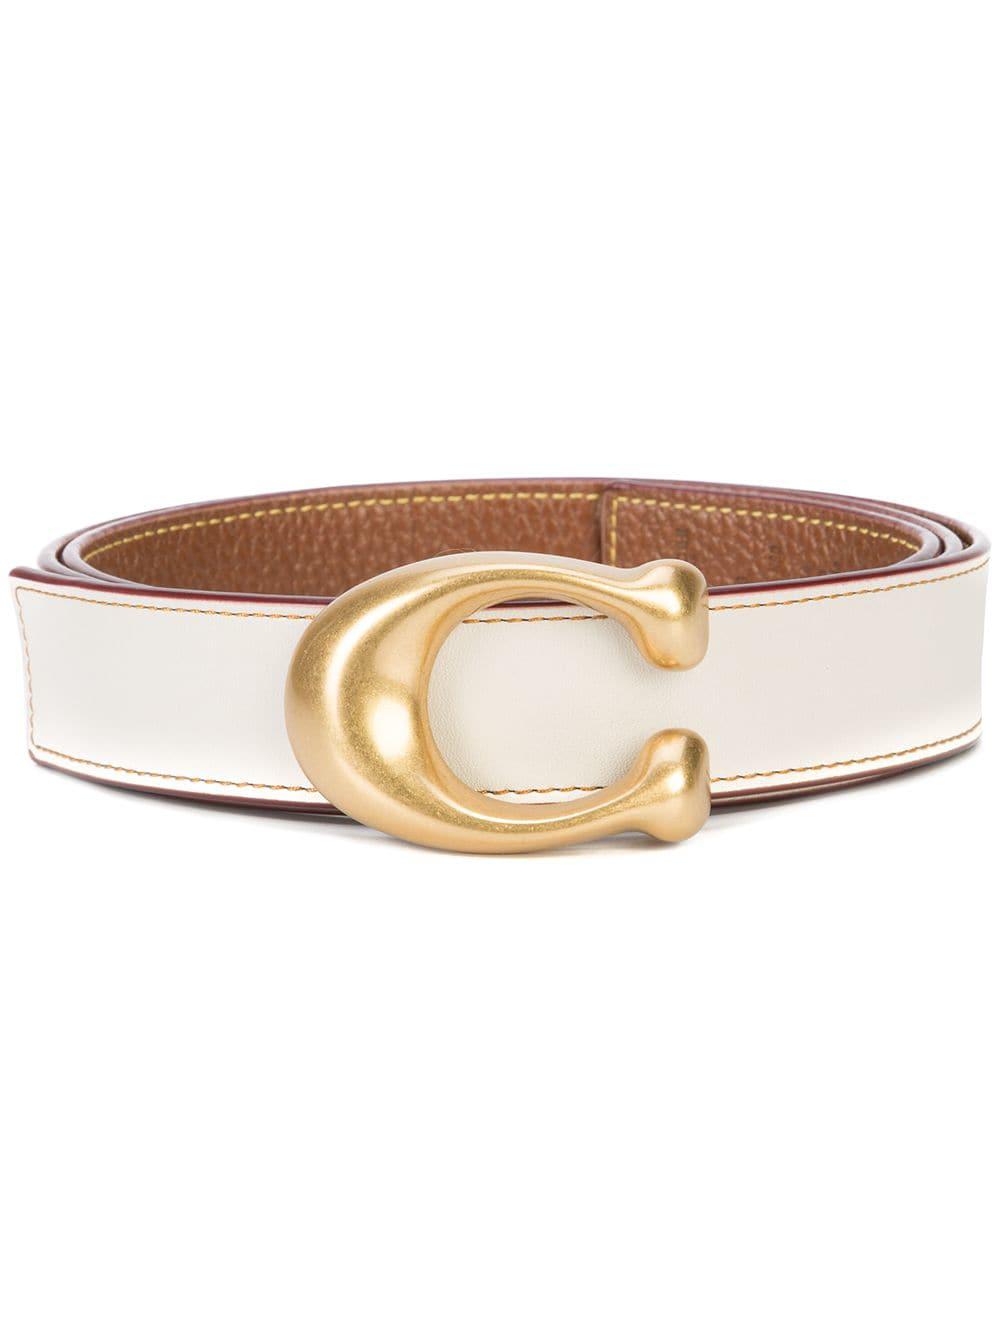 Reversible Belt Leather Belt Beige White 40 Mm 1.5 With -  Hong Kong